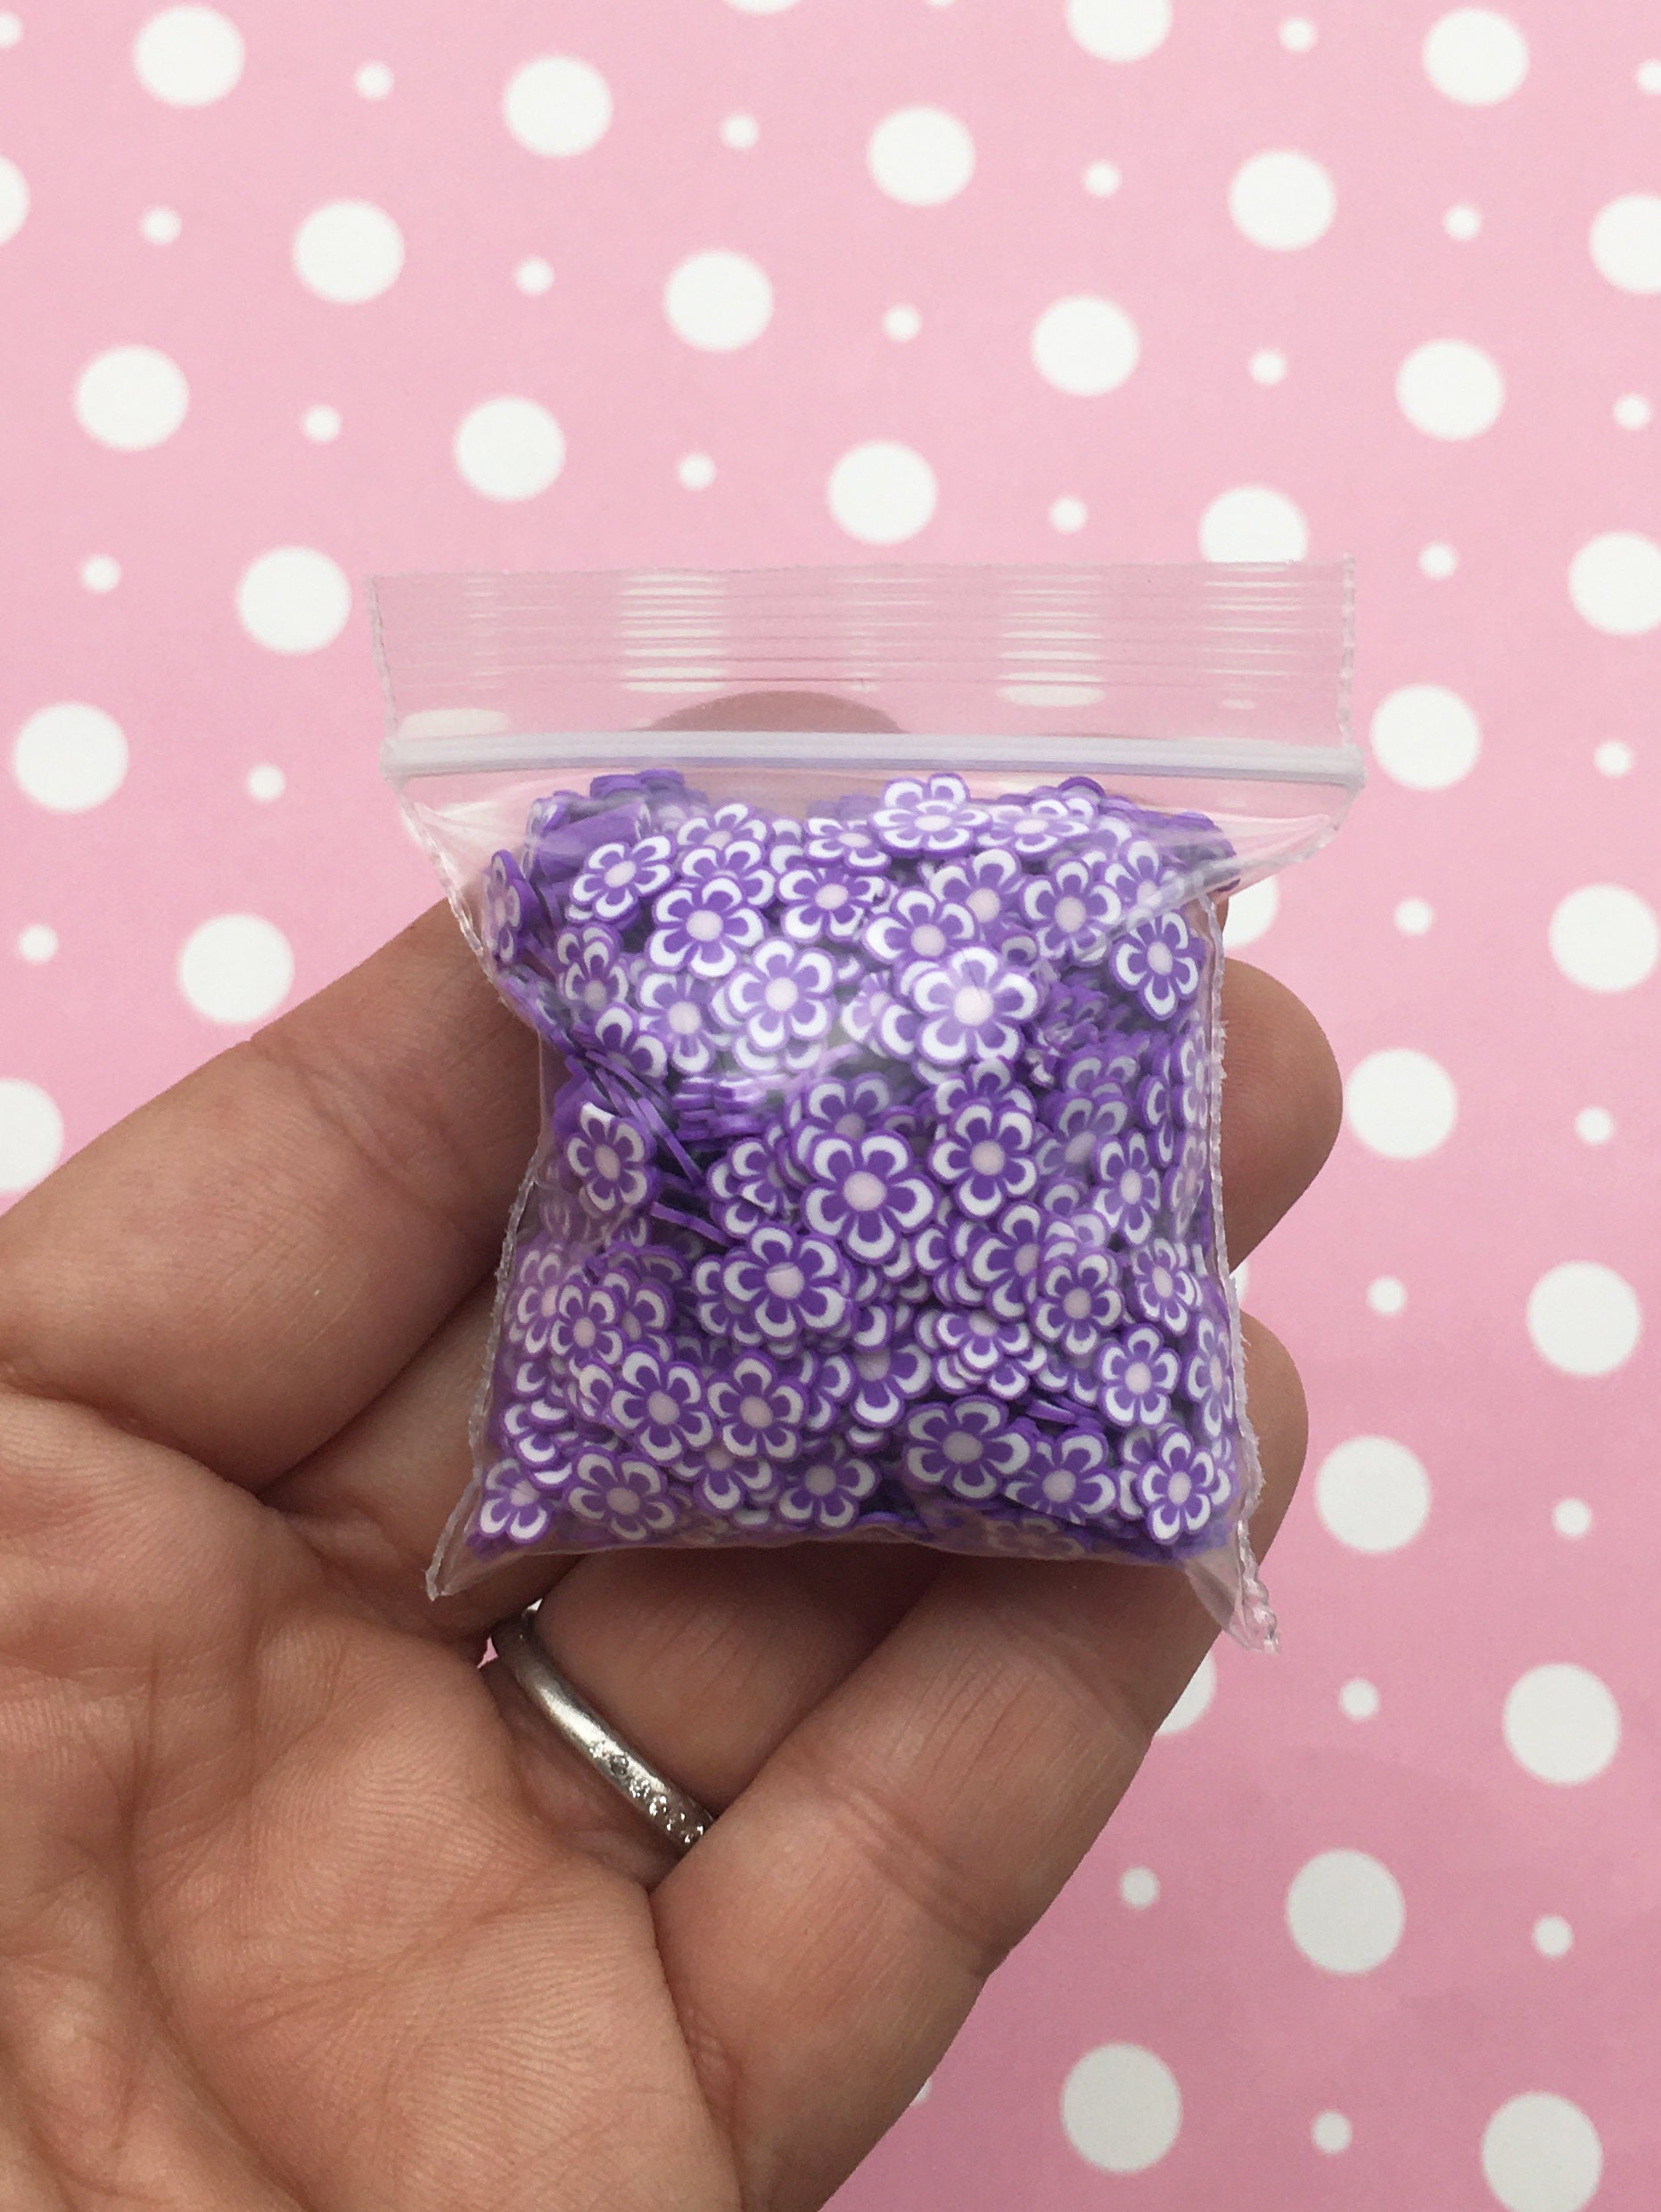 Pastel Foam Beads for Slime, 2mm or 4mm, Approx. 2.5 3 Cups, 10-15